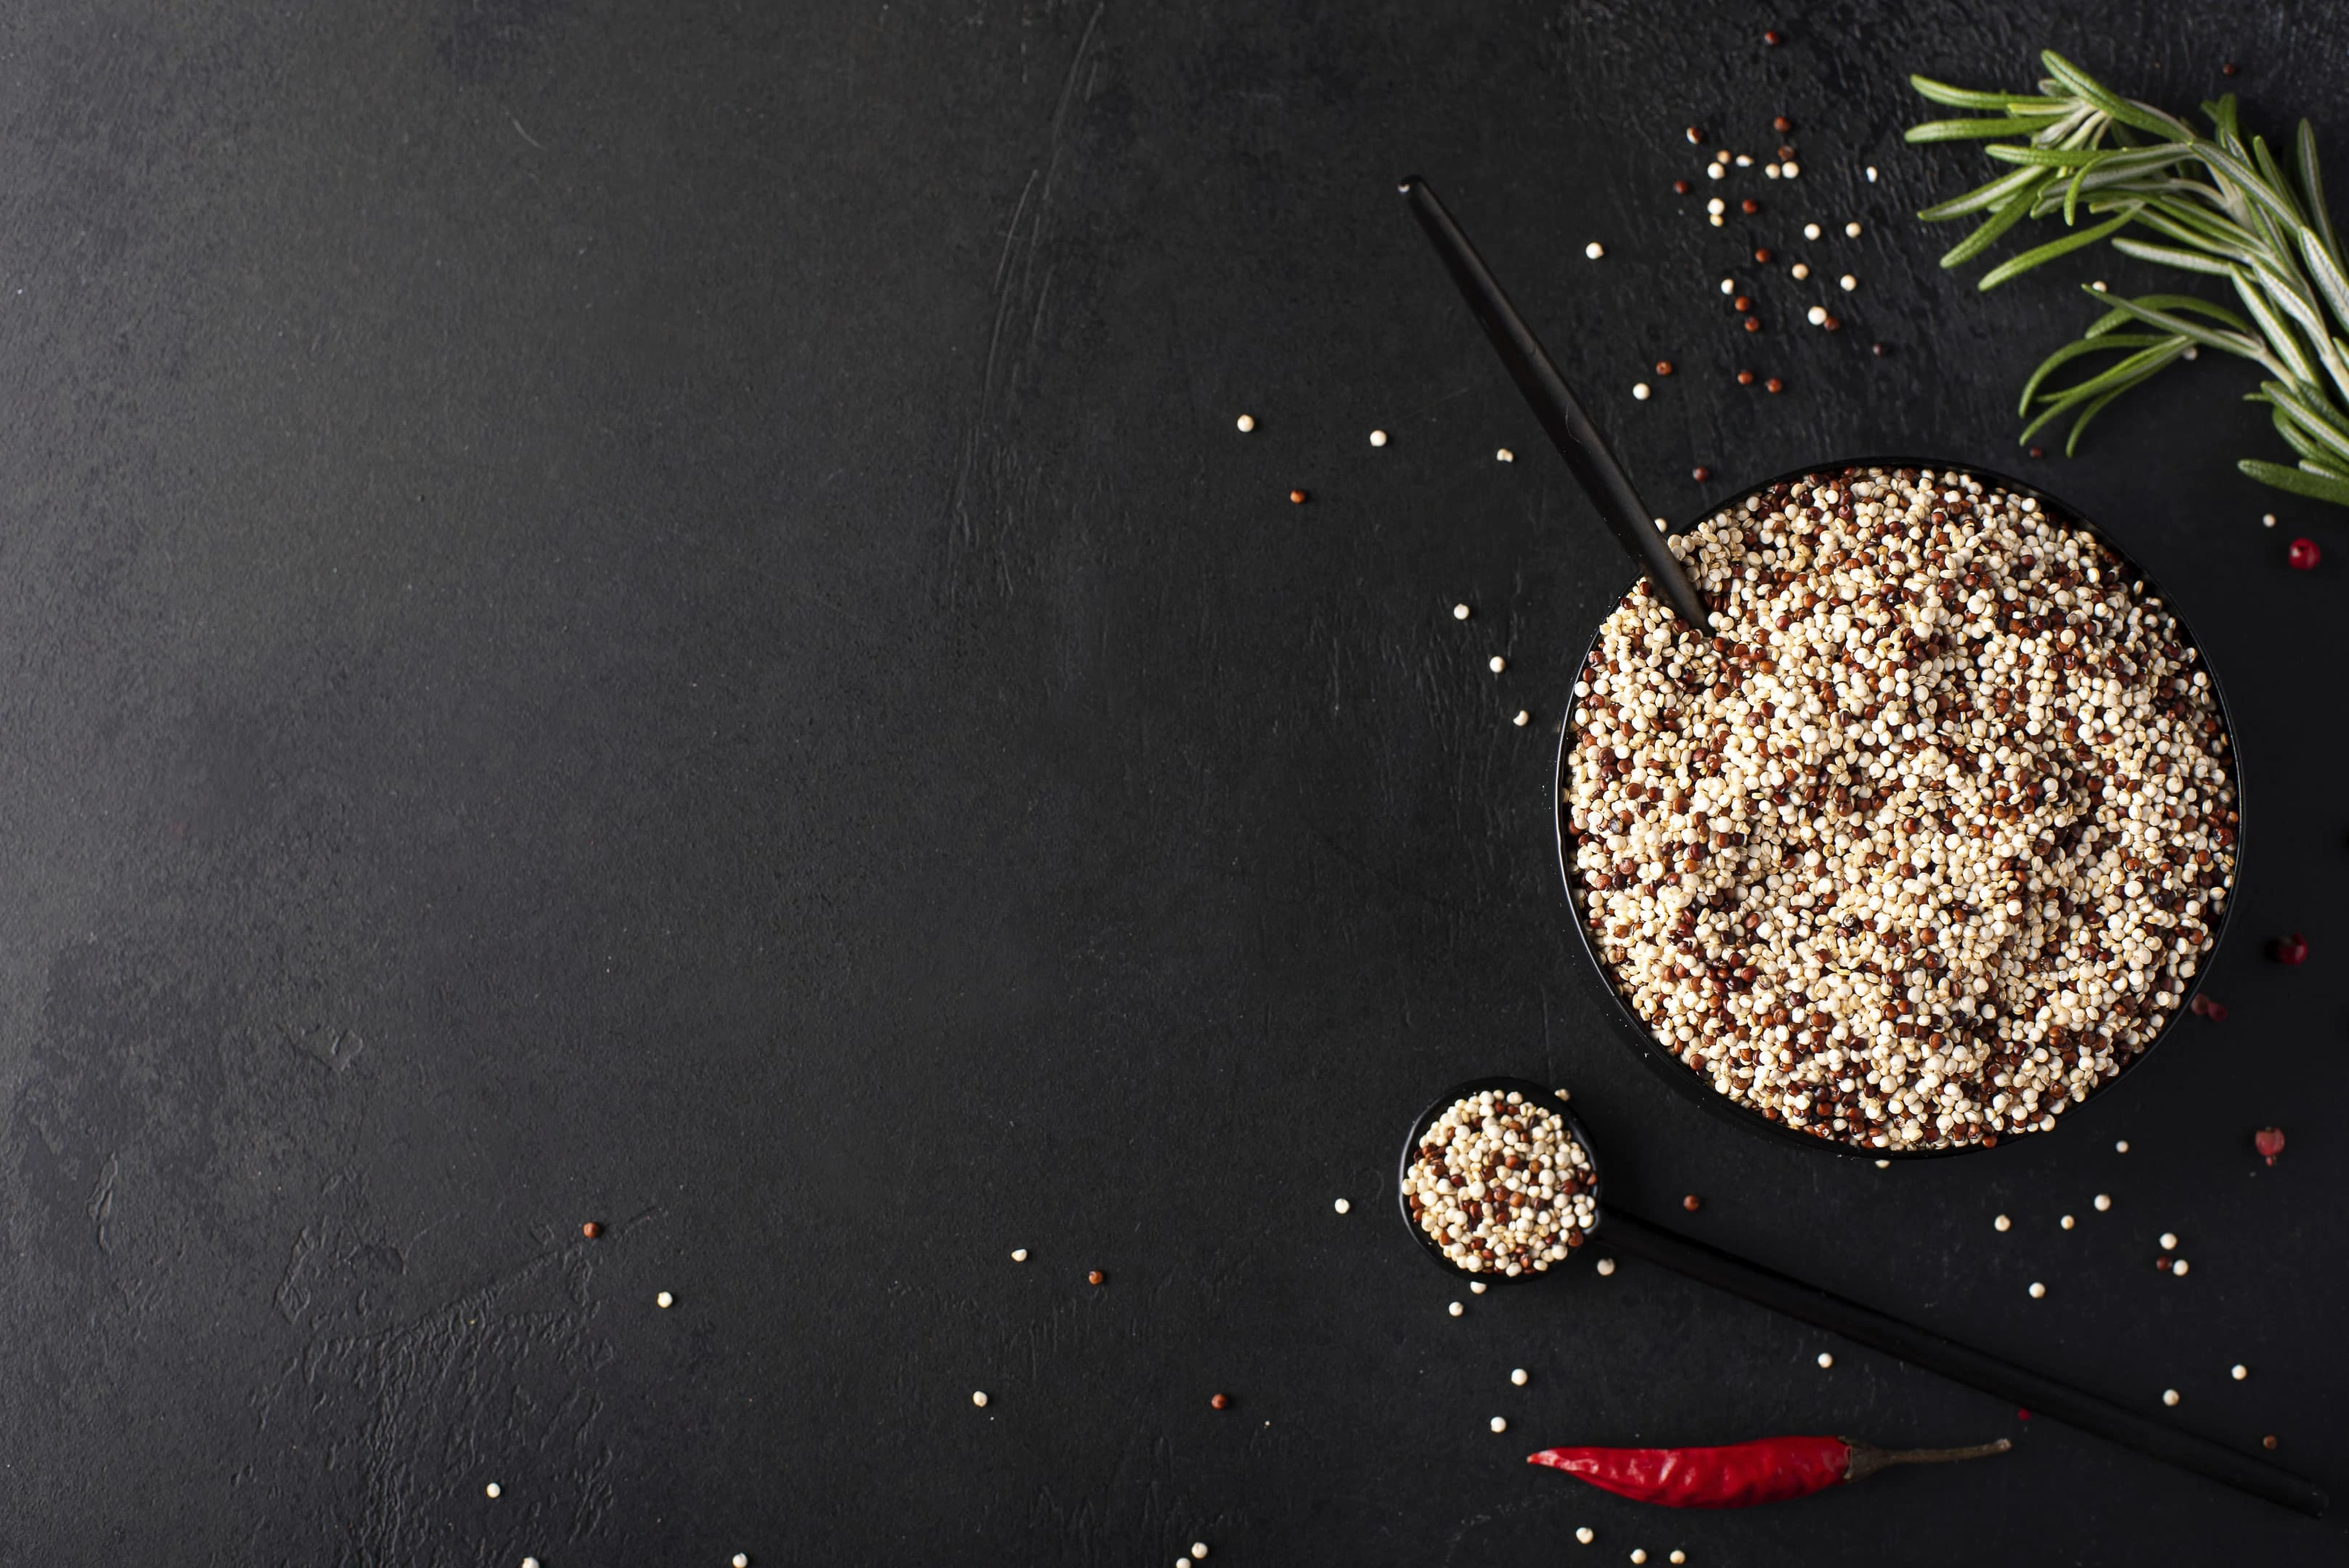 White and red quinoa grits with spices in black bowl